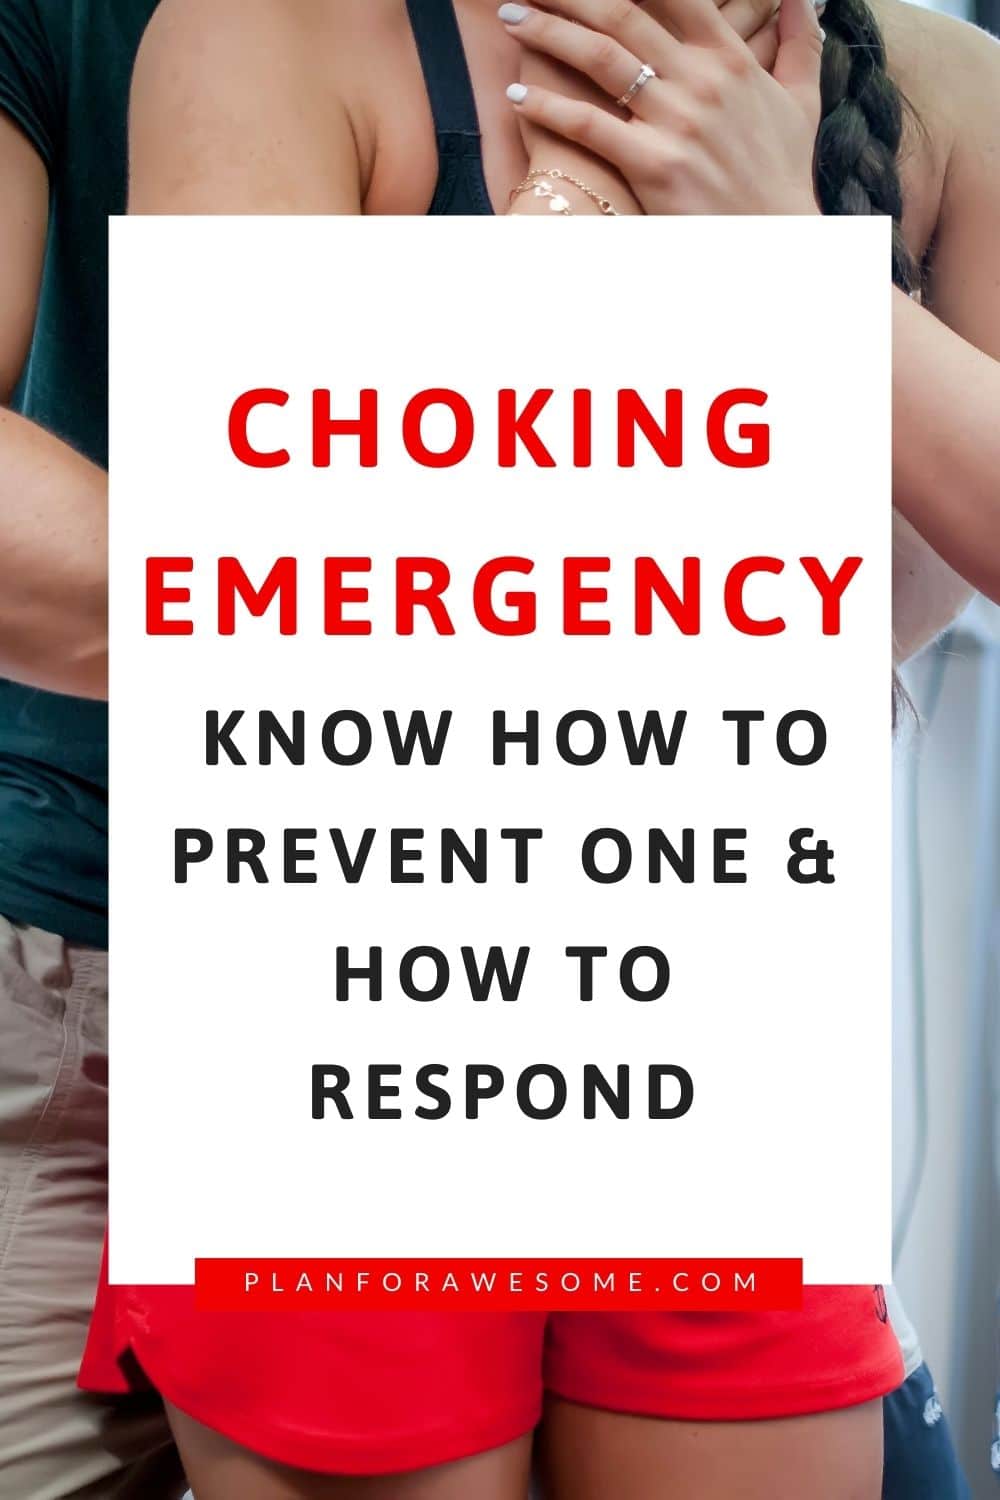 1 great choking prevention resource you should know about